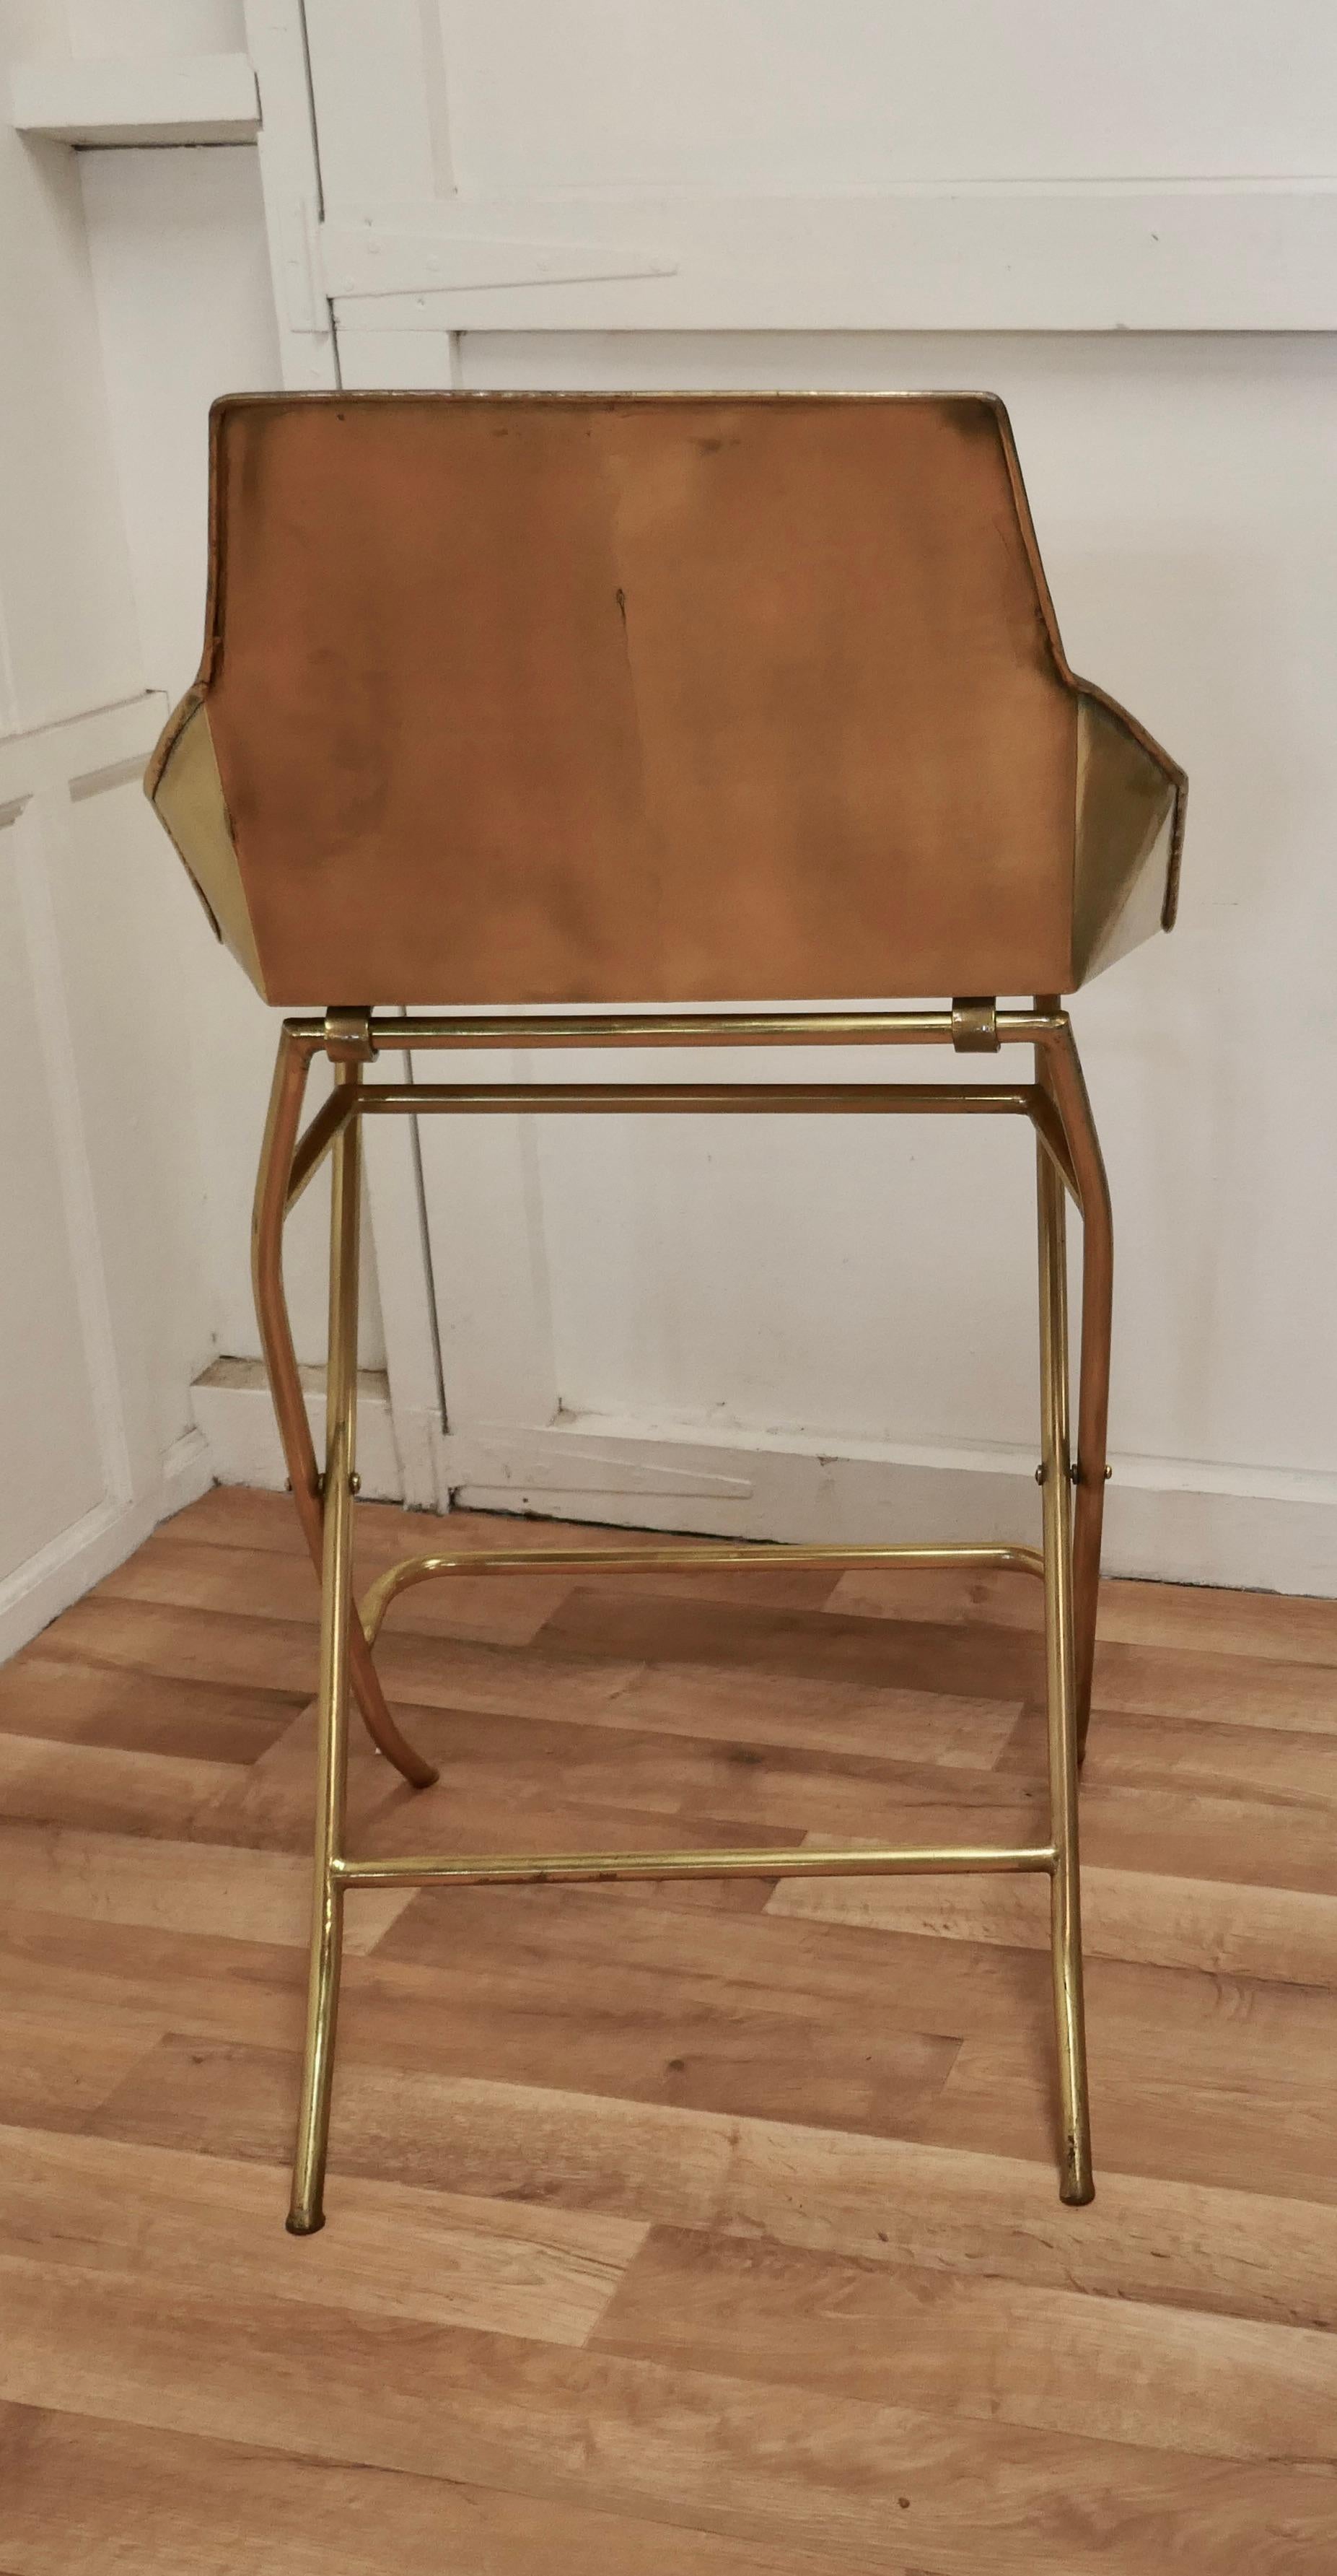 Unusual Brass Adjustable Designer Chair In Good Condition For Sale In Chillerton, Isle of Wight